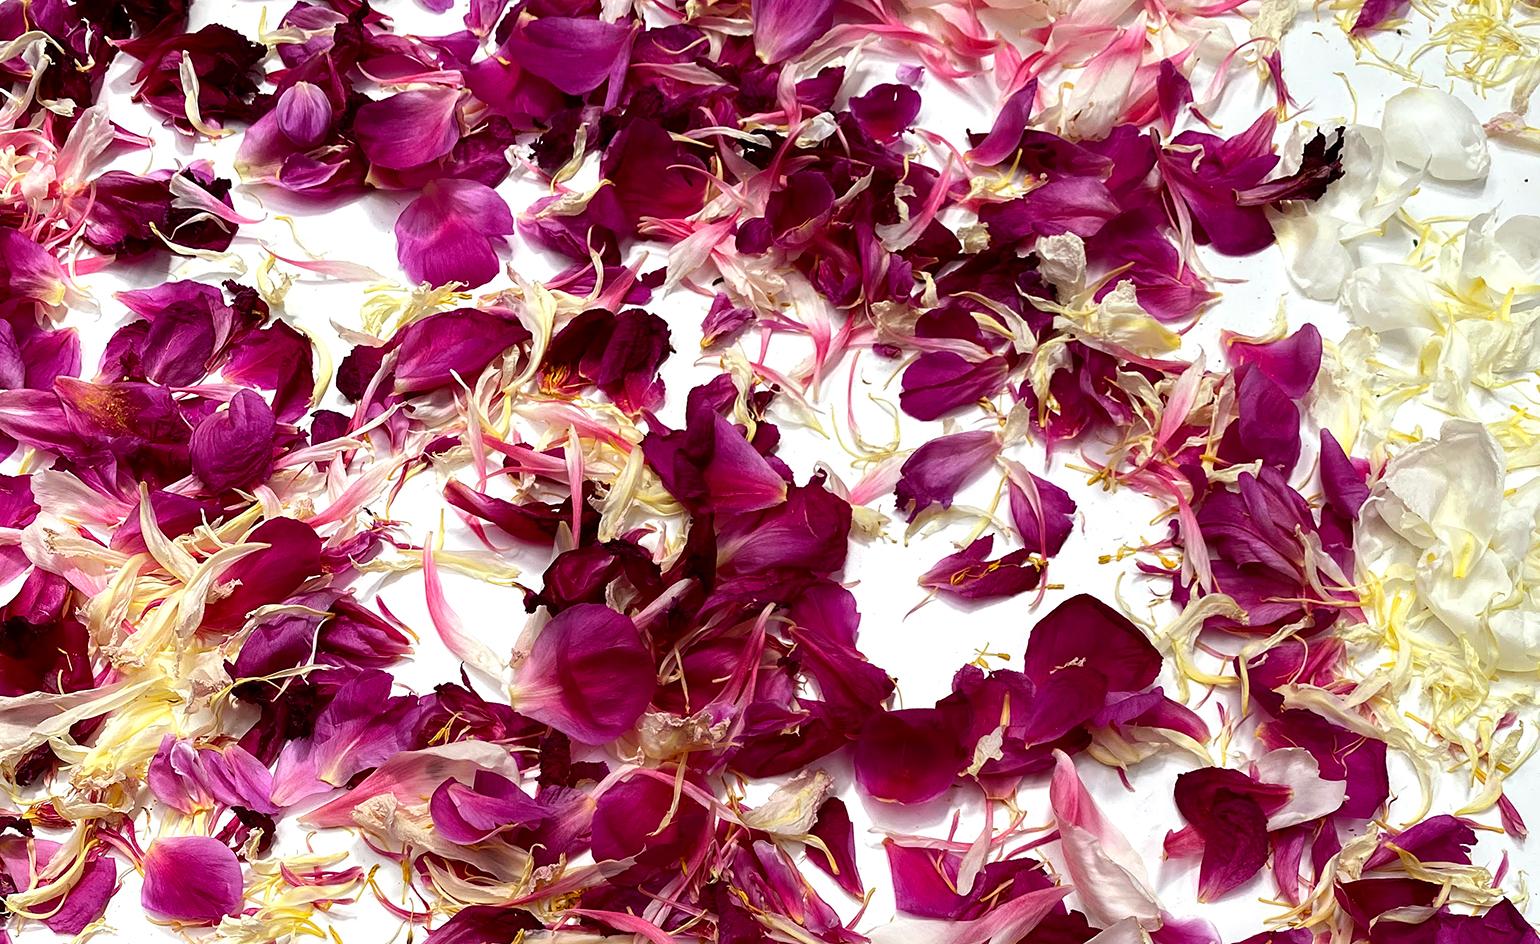 Recipes for uplifting rose-based remedies at home